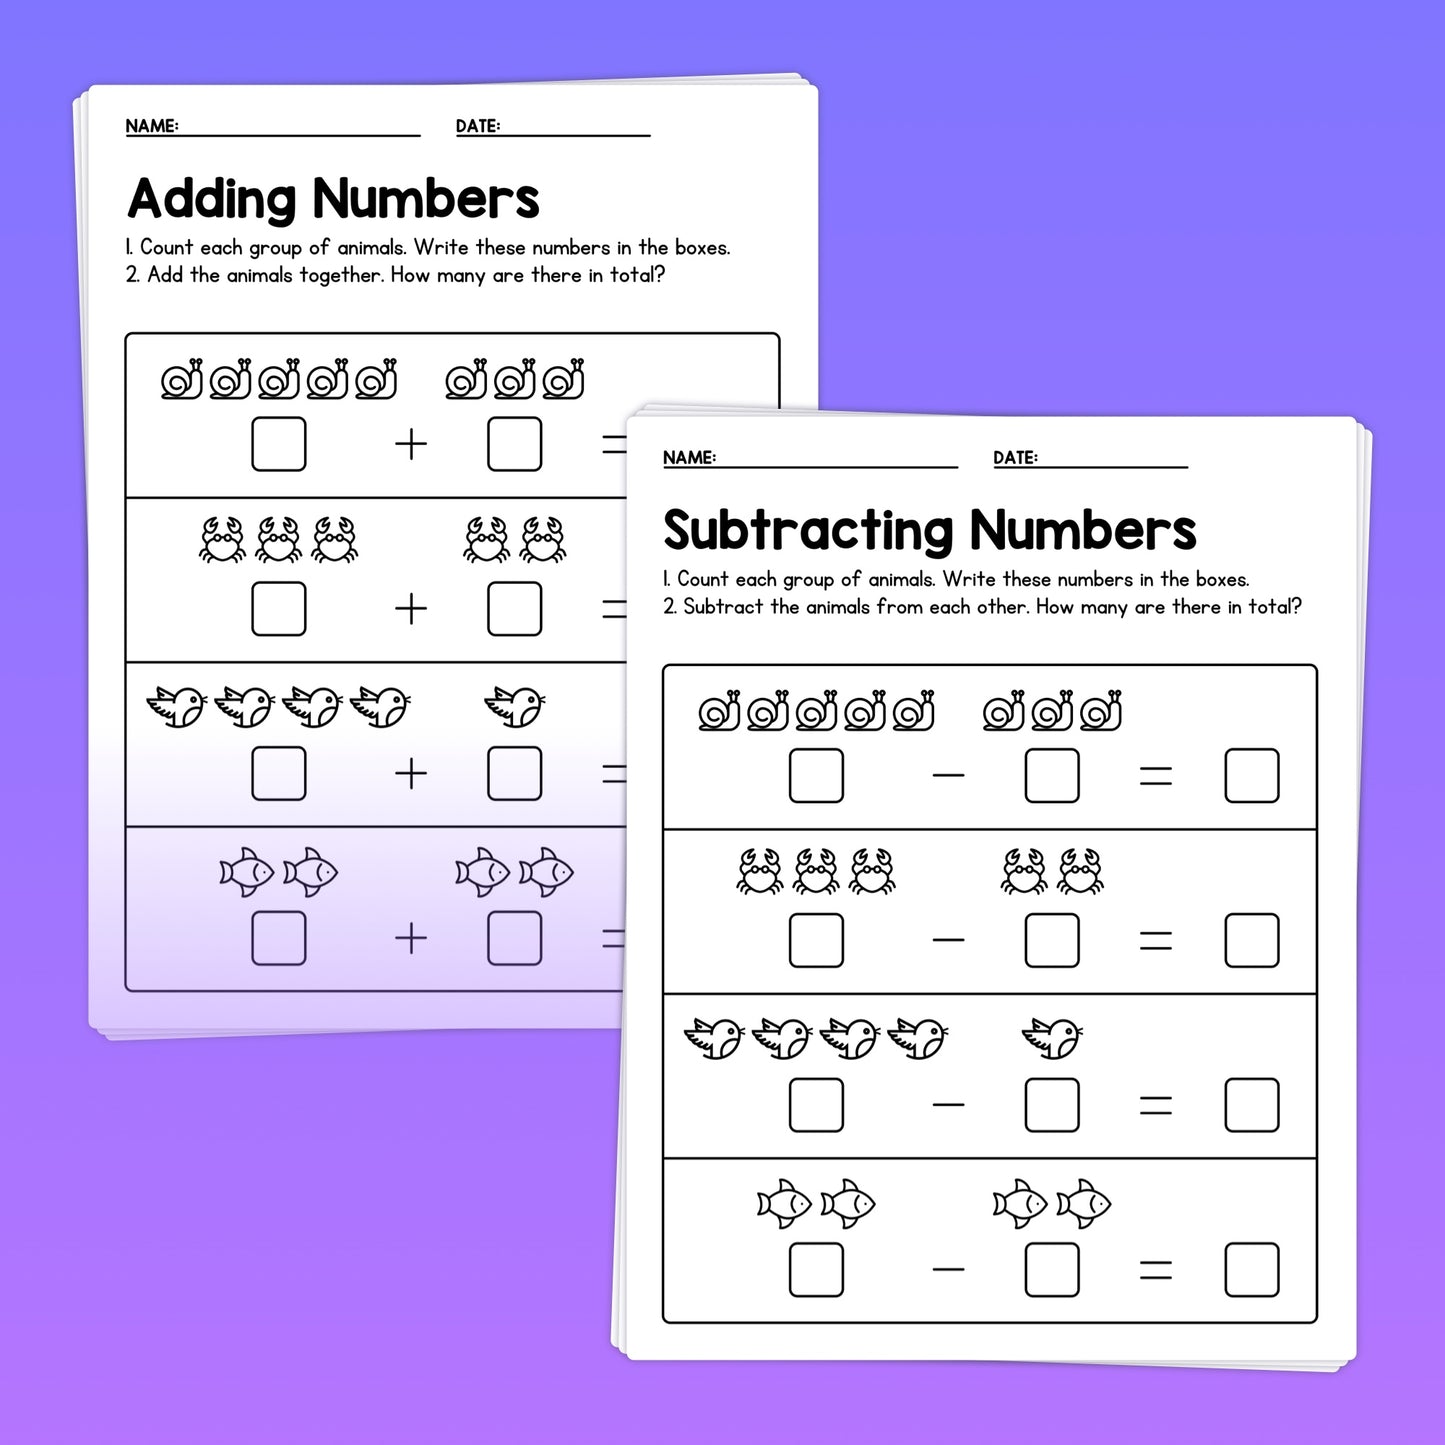 Adding ad subtracting numbers worksheets